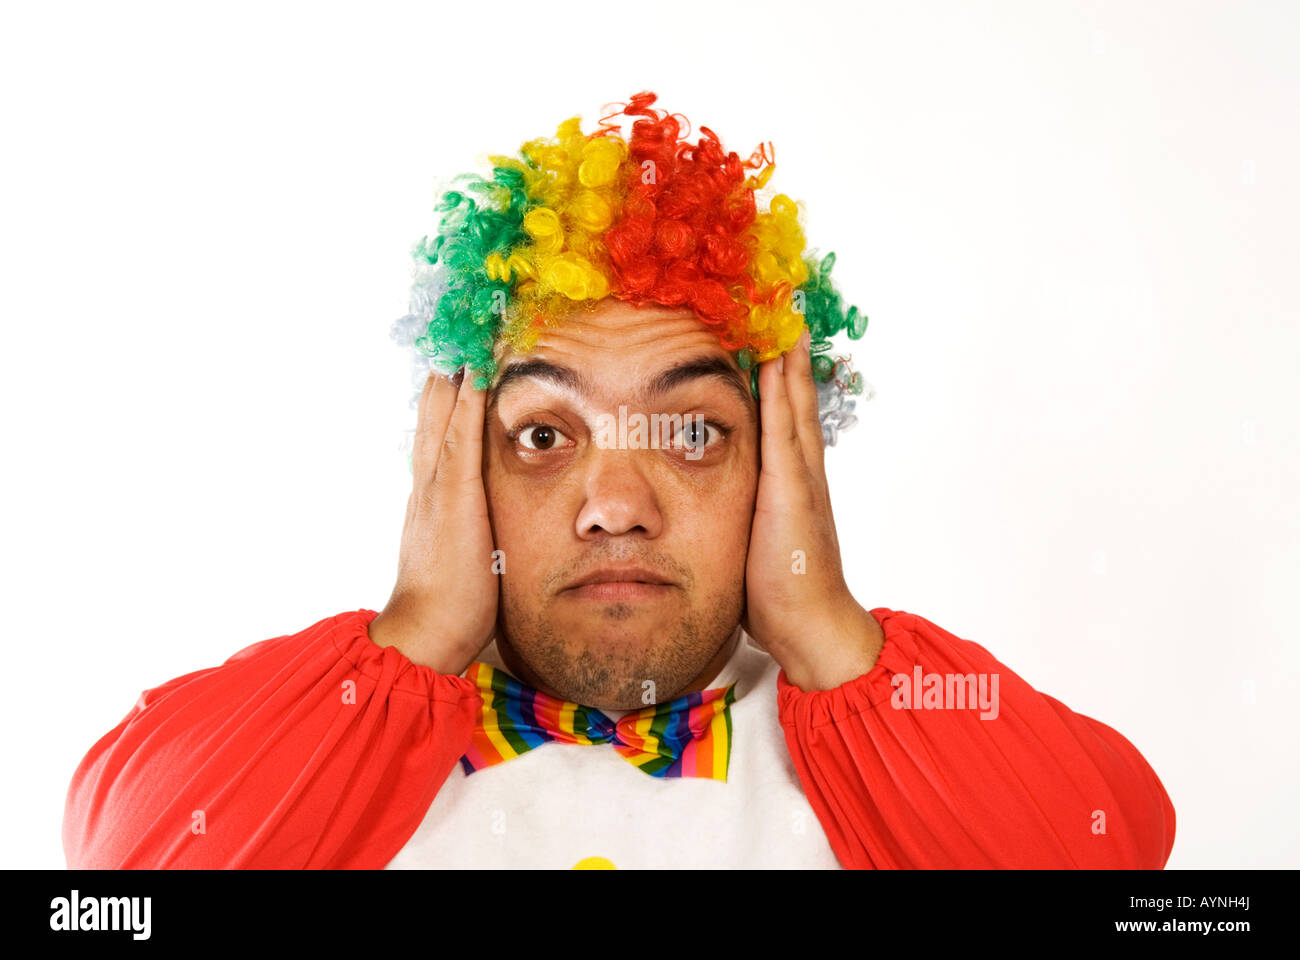 Head and shoulders portrait of a surprised midget clown hands on ears against a white background Stock Photo